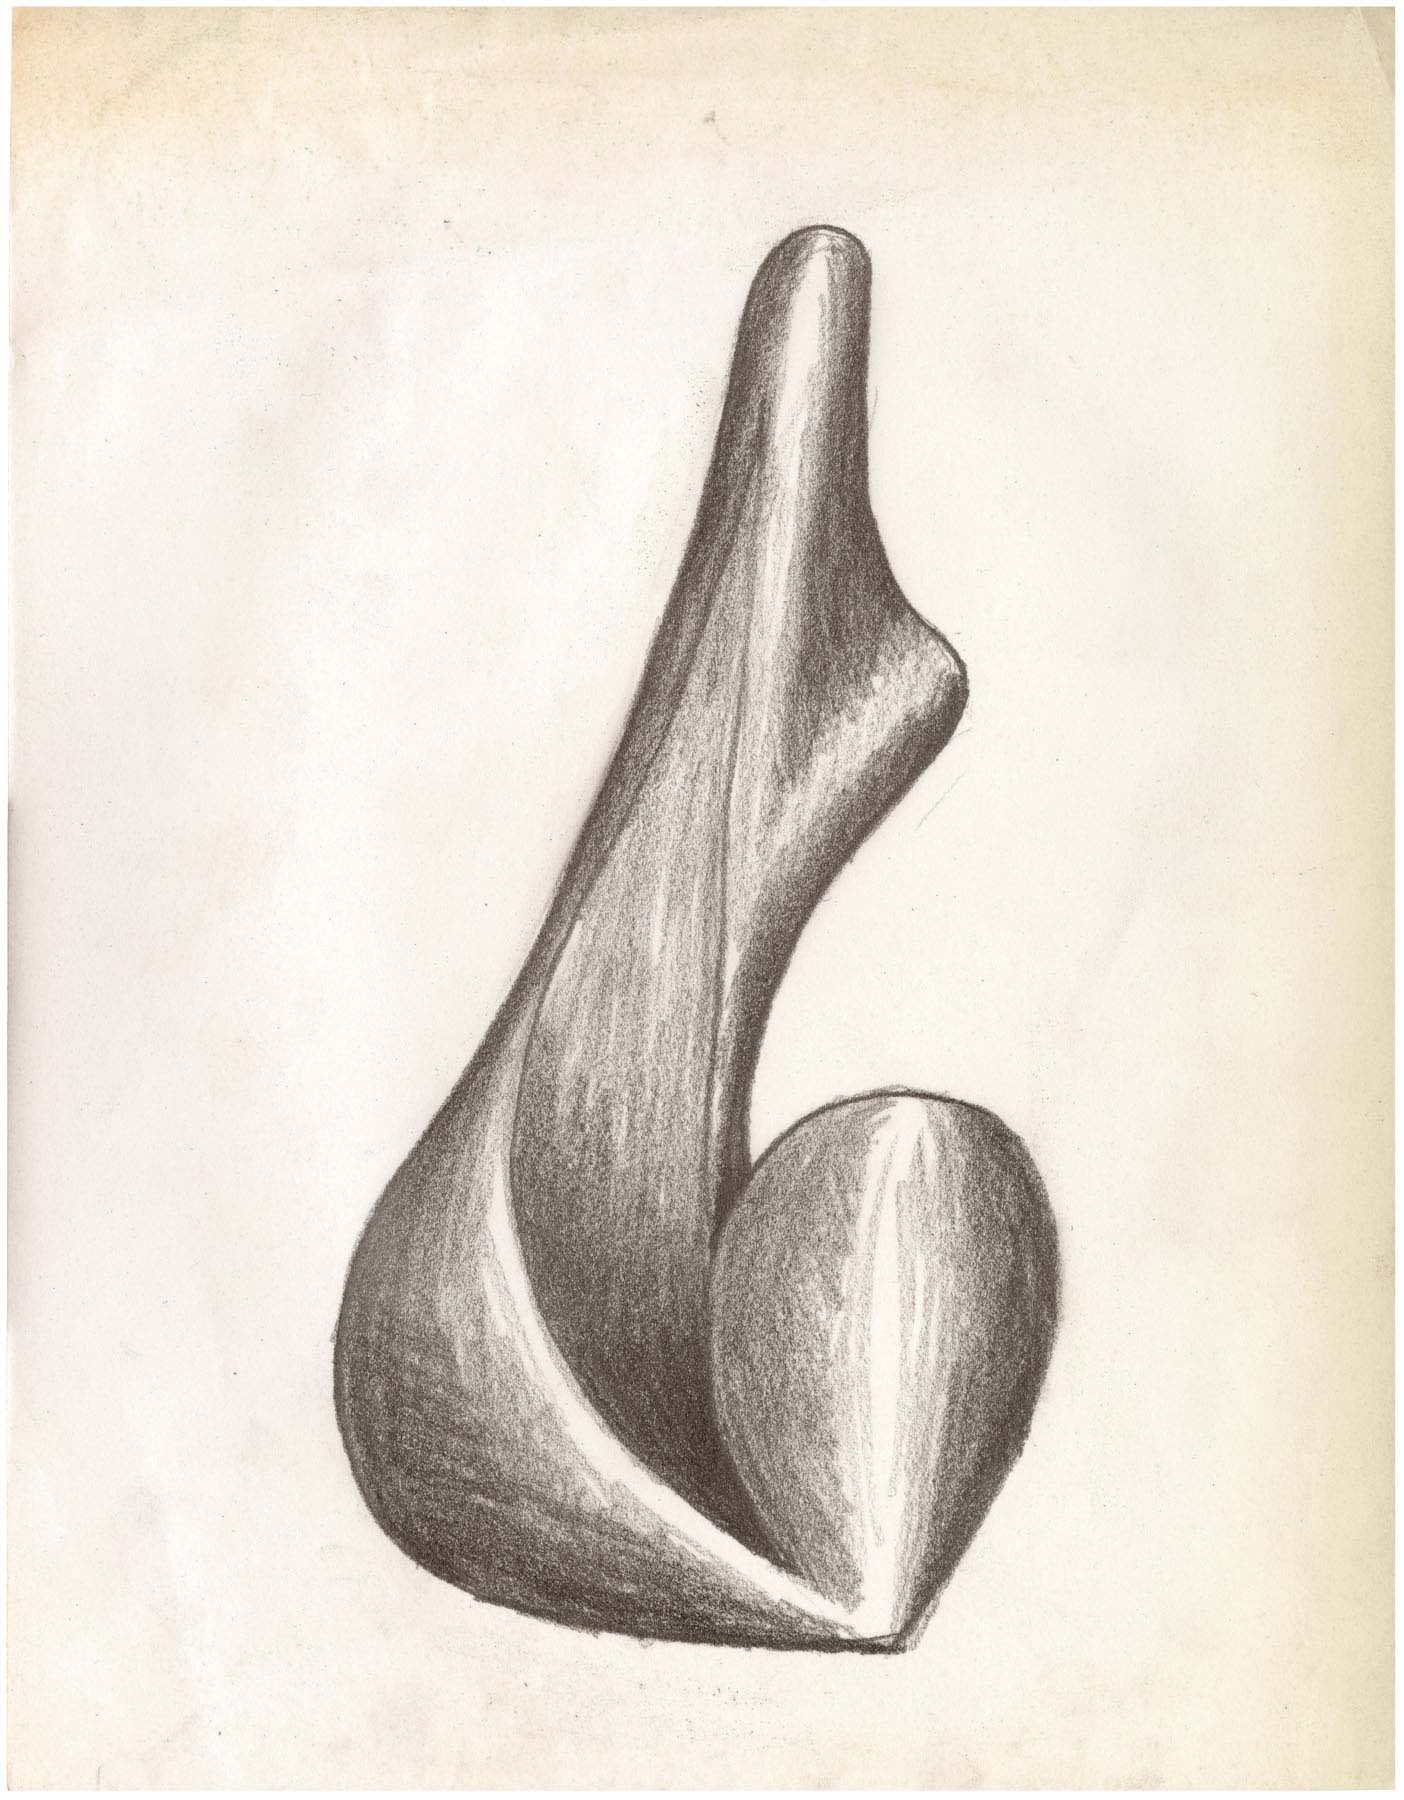 A pencil sketch of an abstract, shell-like shape with highlighting and shading details.